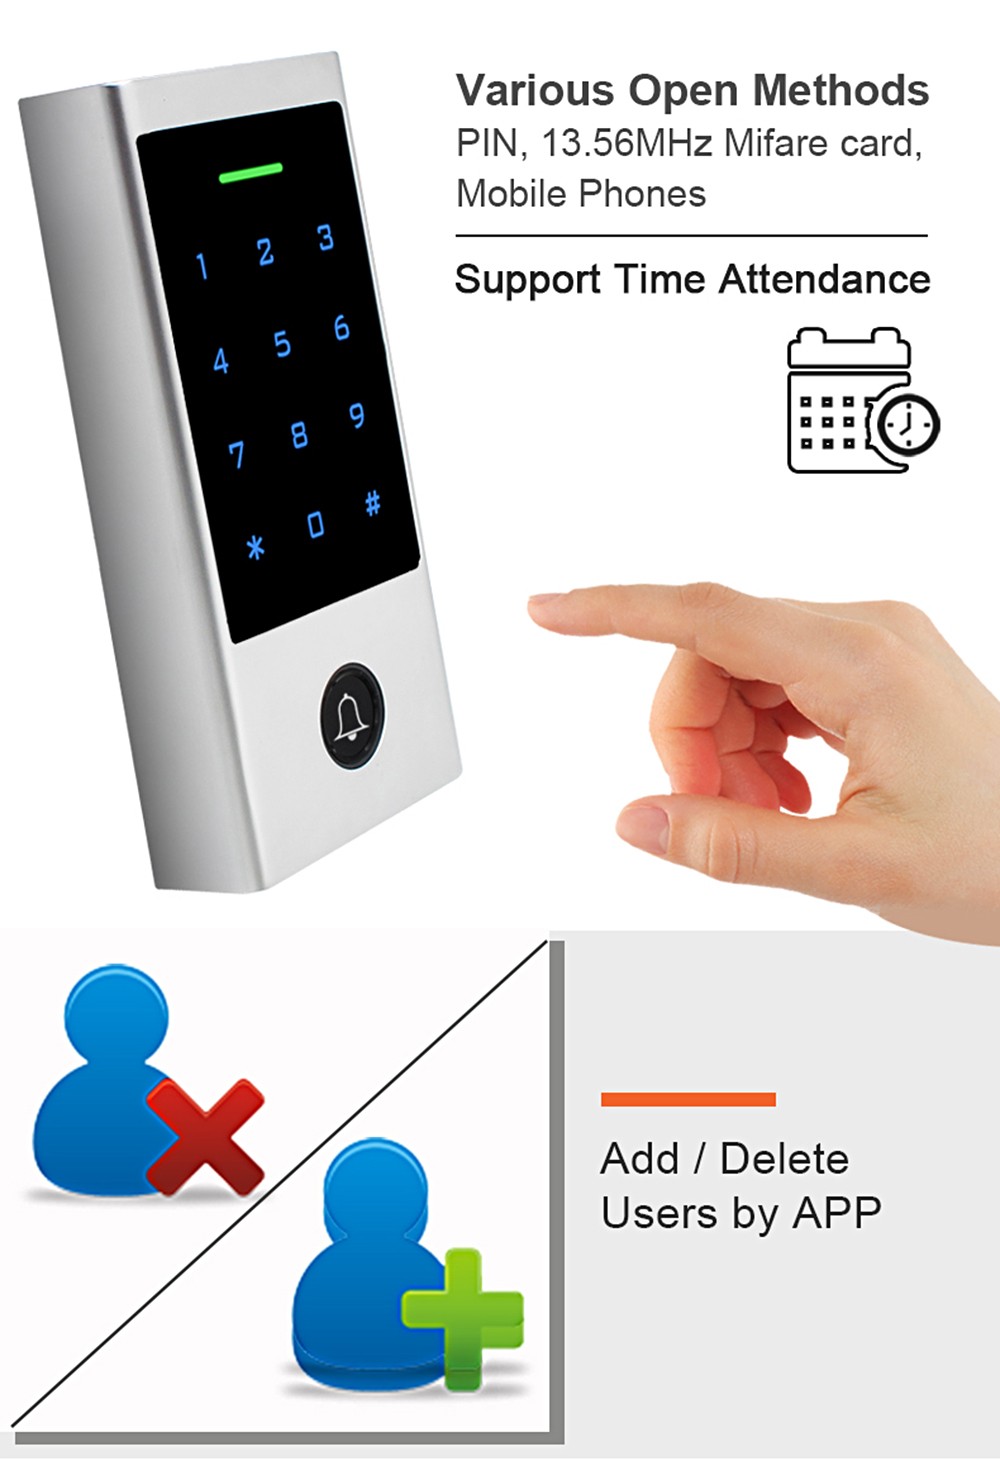 Access Control YFBA-H1